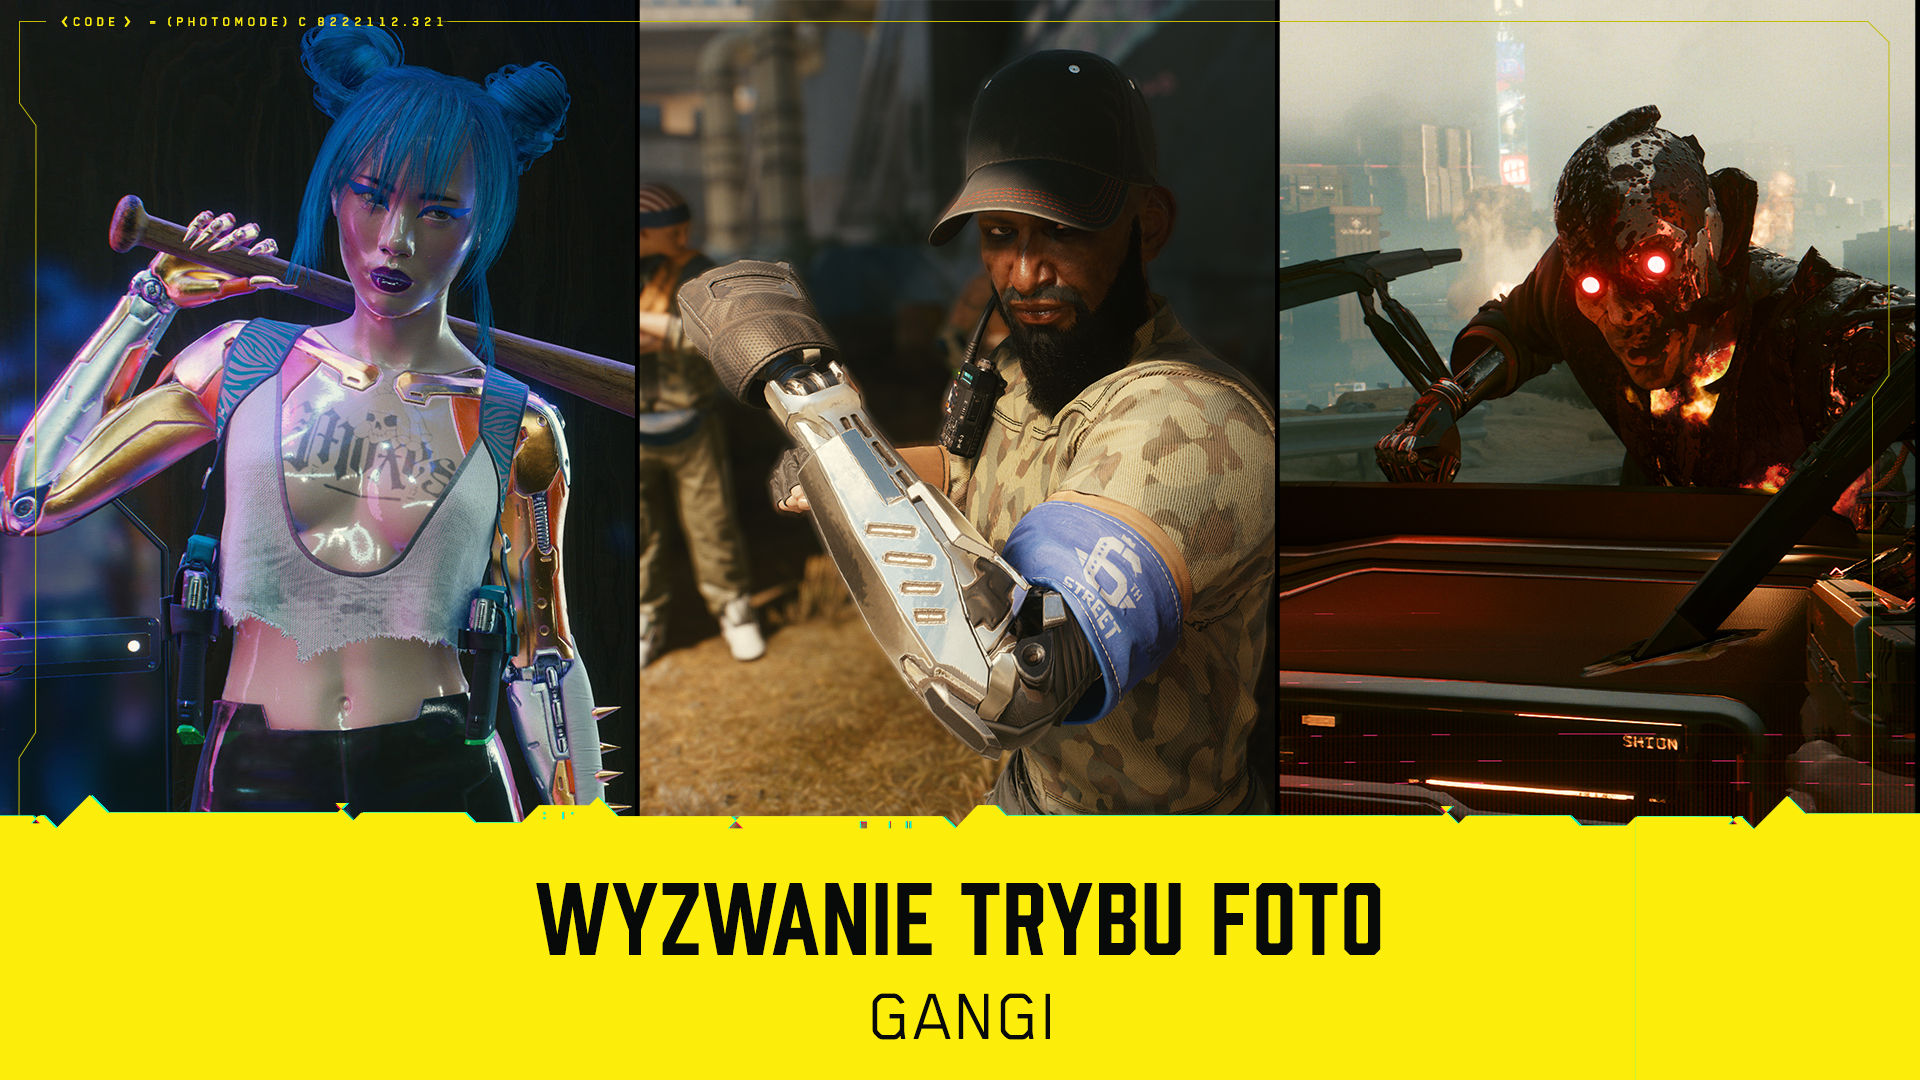 PL_PhotomodeContest_Gangs_1920x1080.png